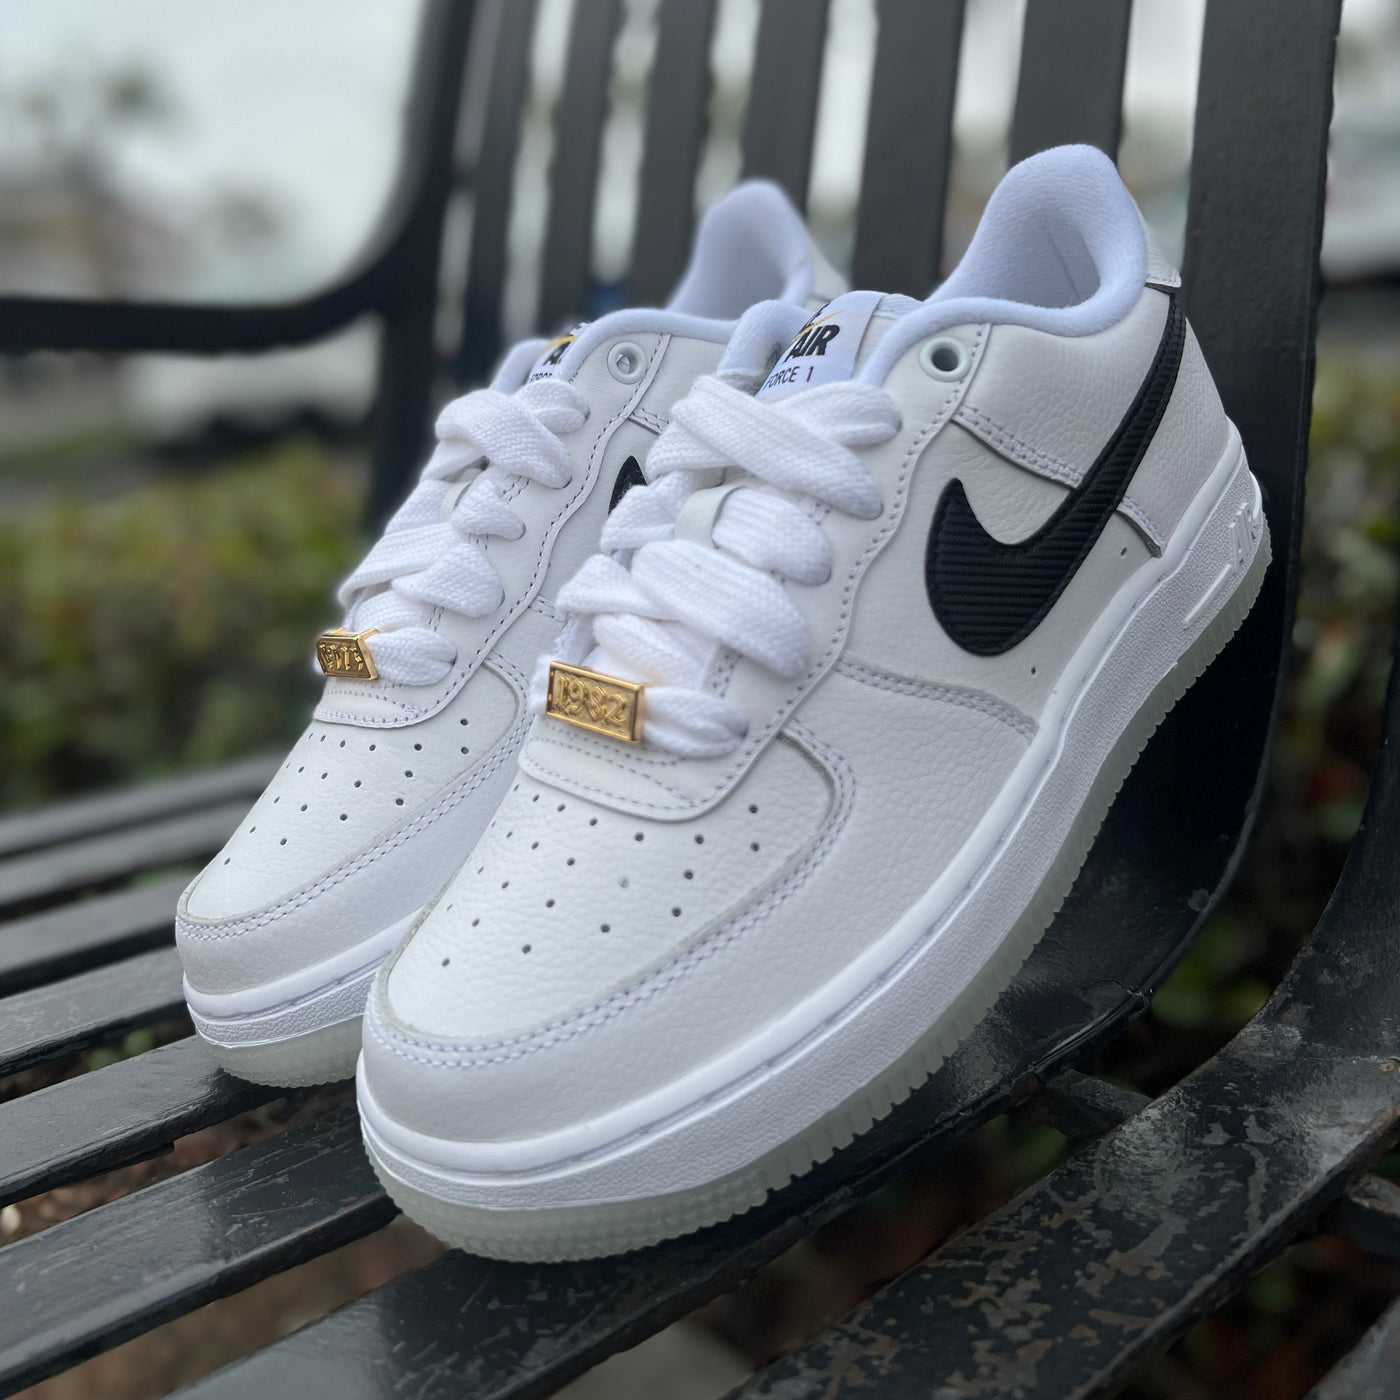 Nike Air force One Worldwide for Sale in Bronx, NY - OfferUp